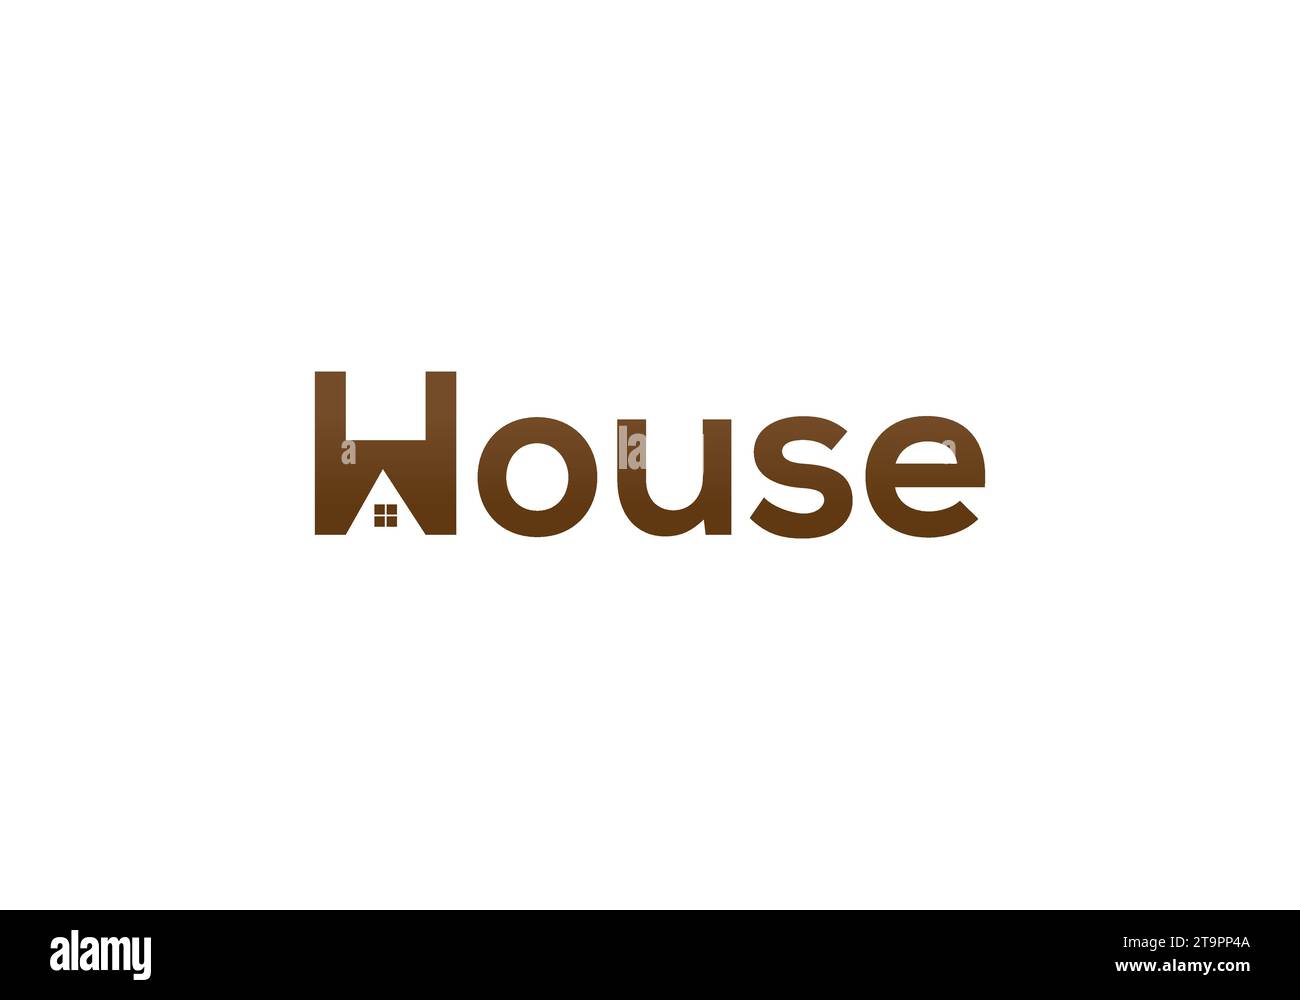 House logo design vector template. Real estate, property, construction, realty and property icon. House text concept Stock Vector